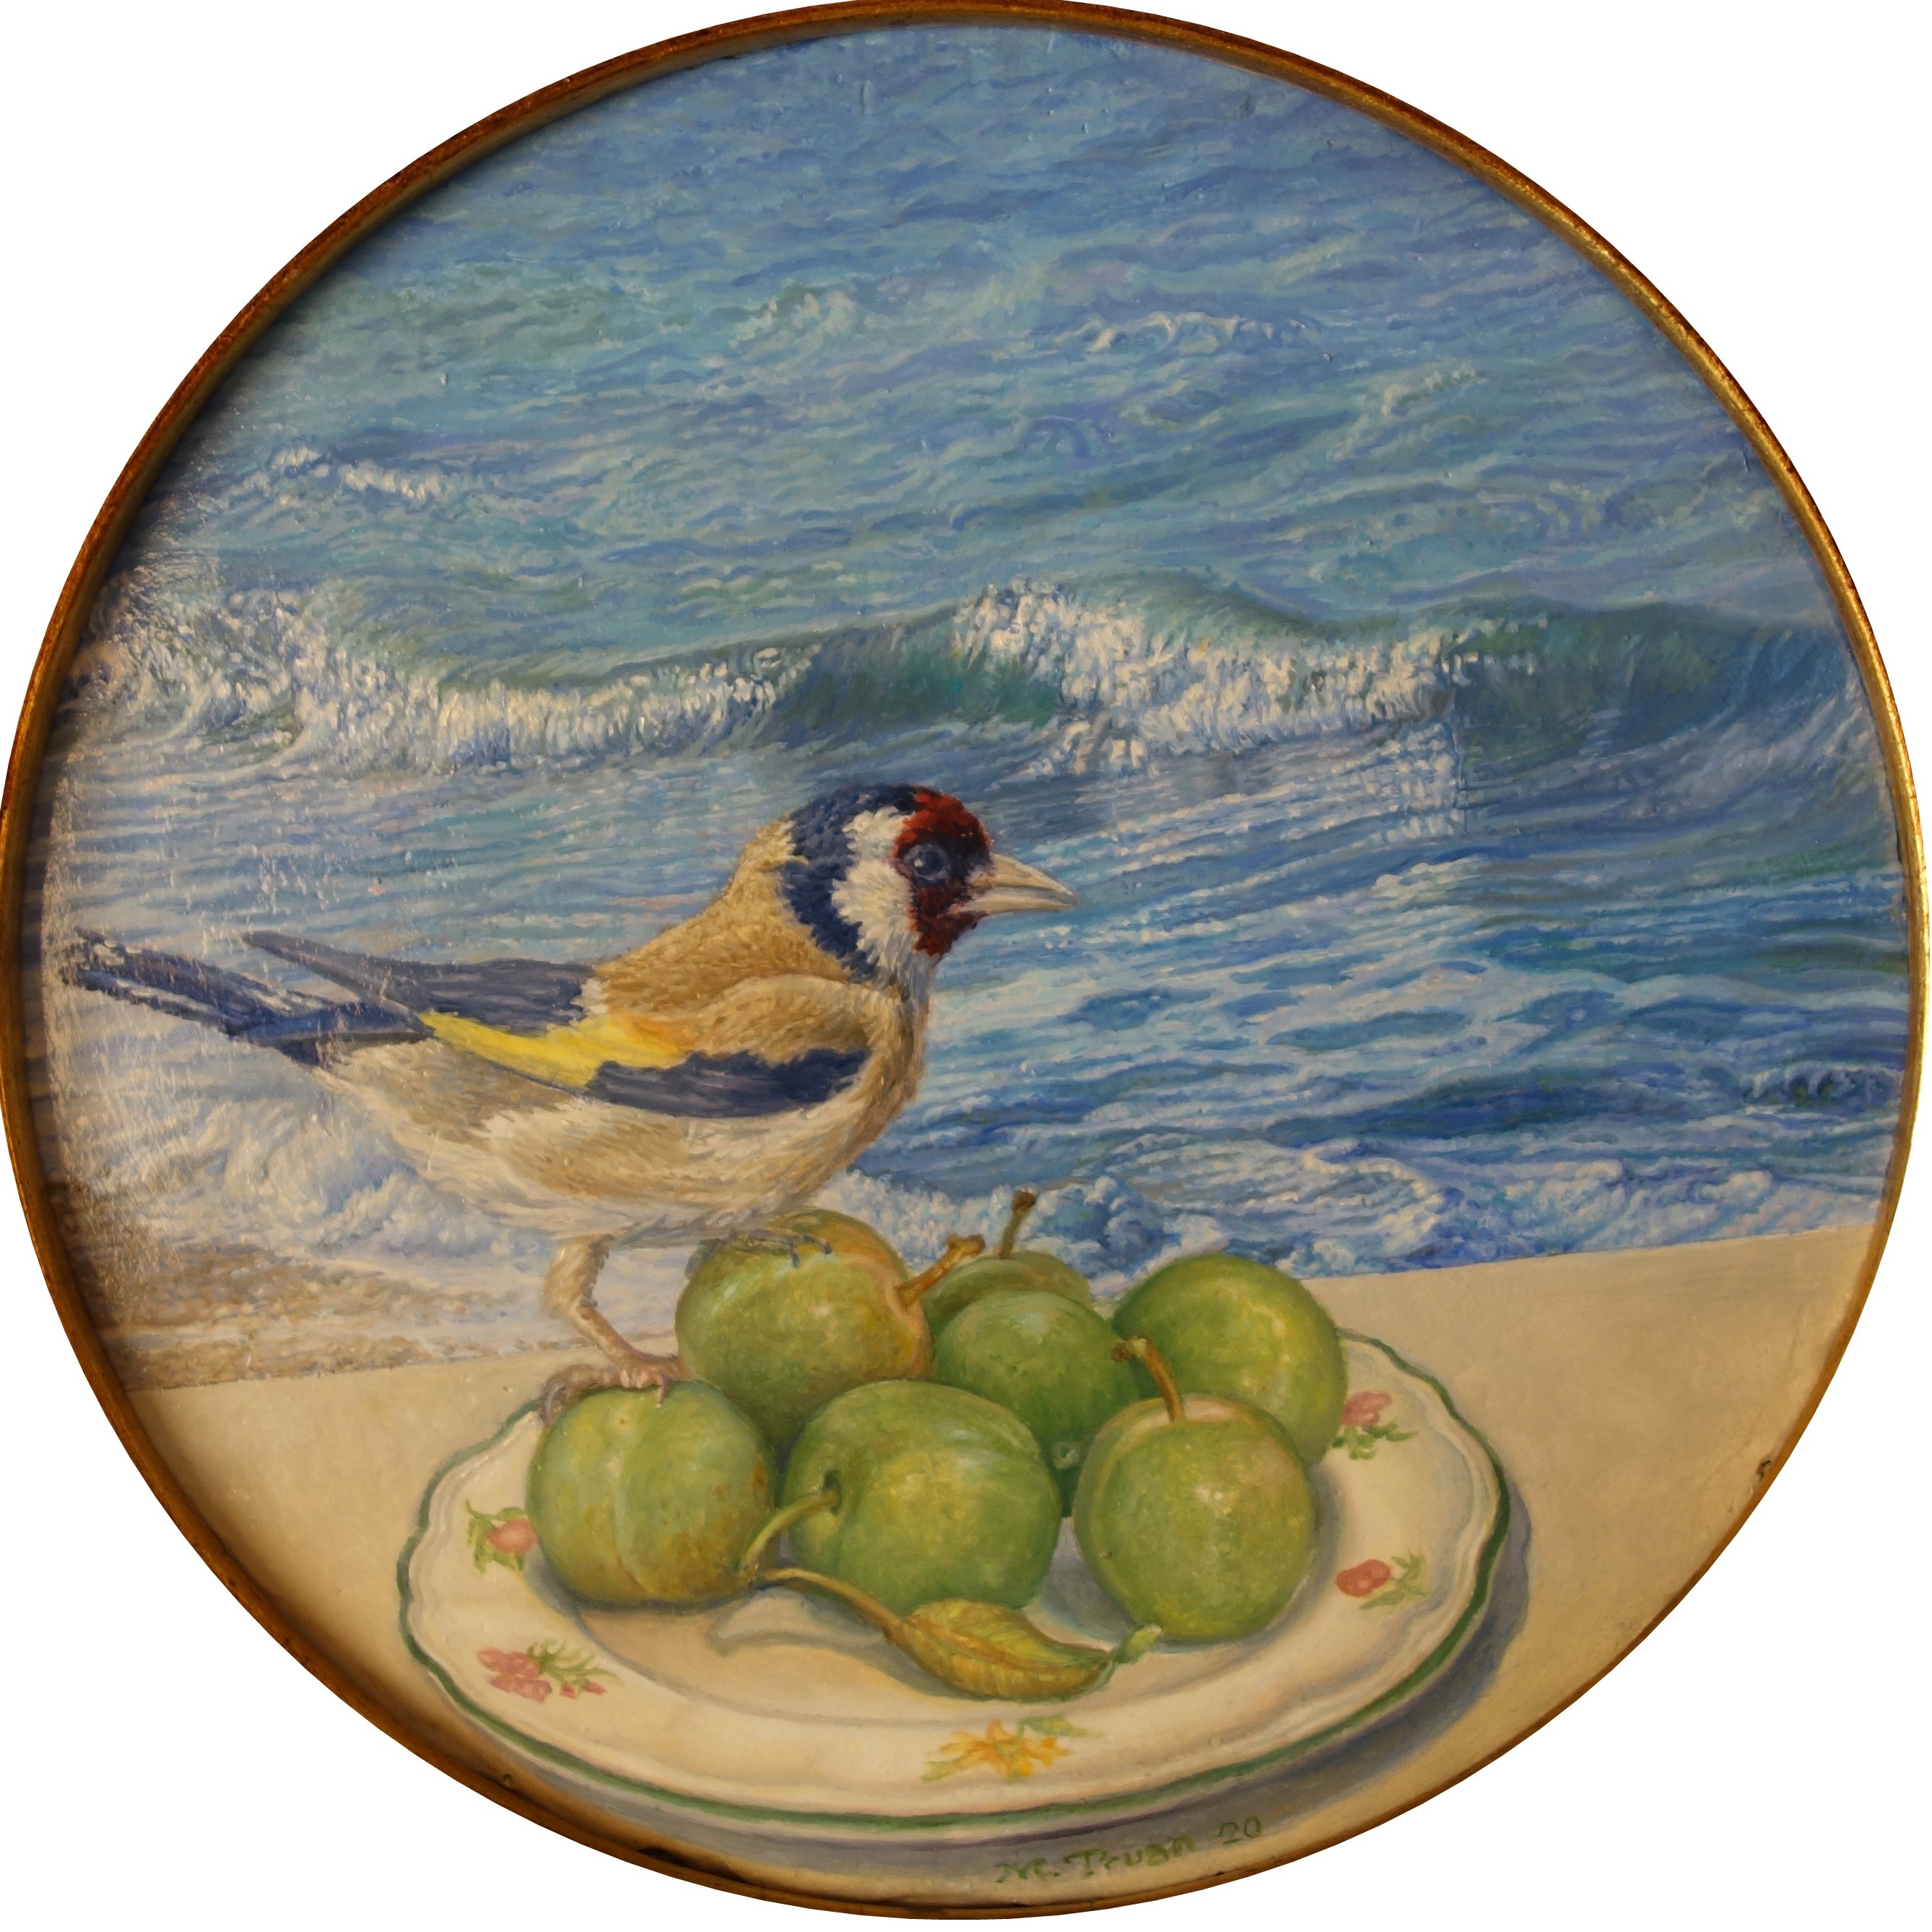 Plums and goldfinch on the beach, 2020, oil on canvas on wood, diameter 8.6 in.